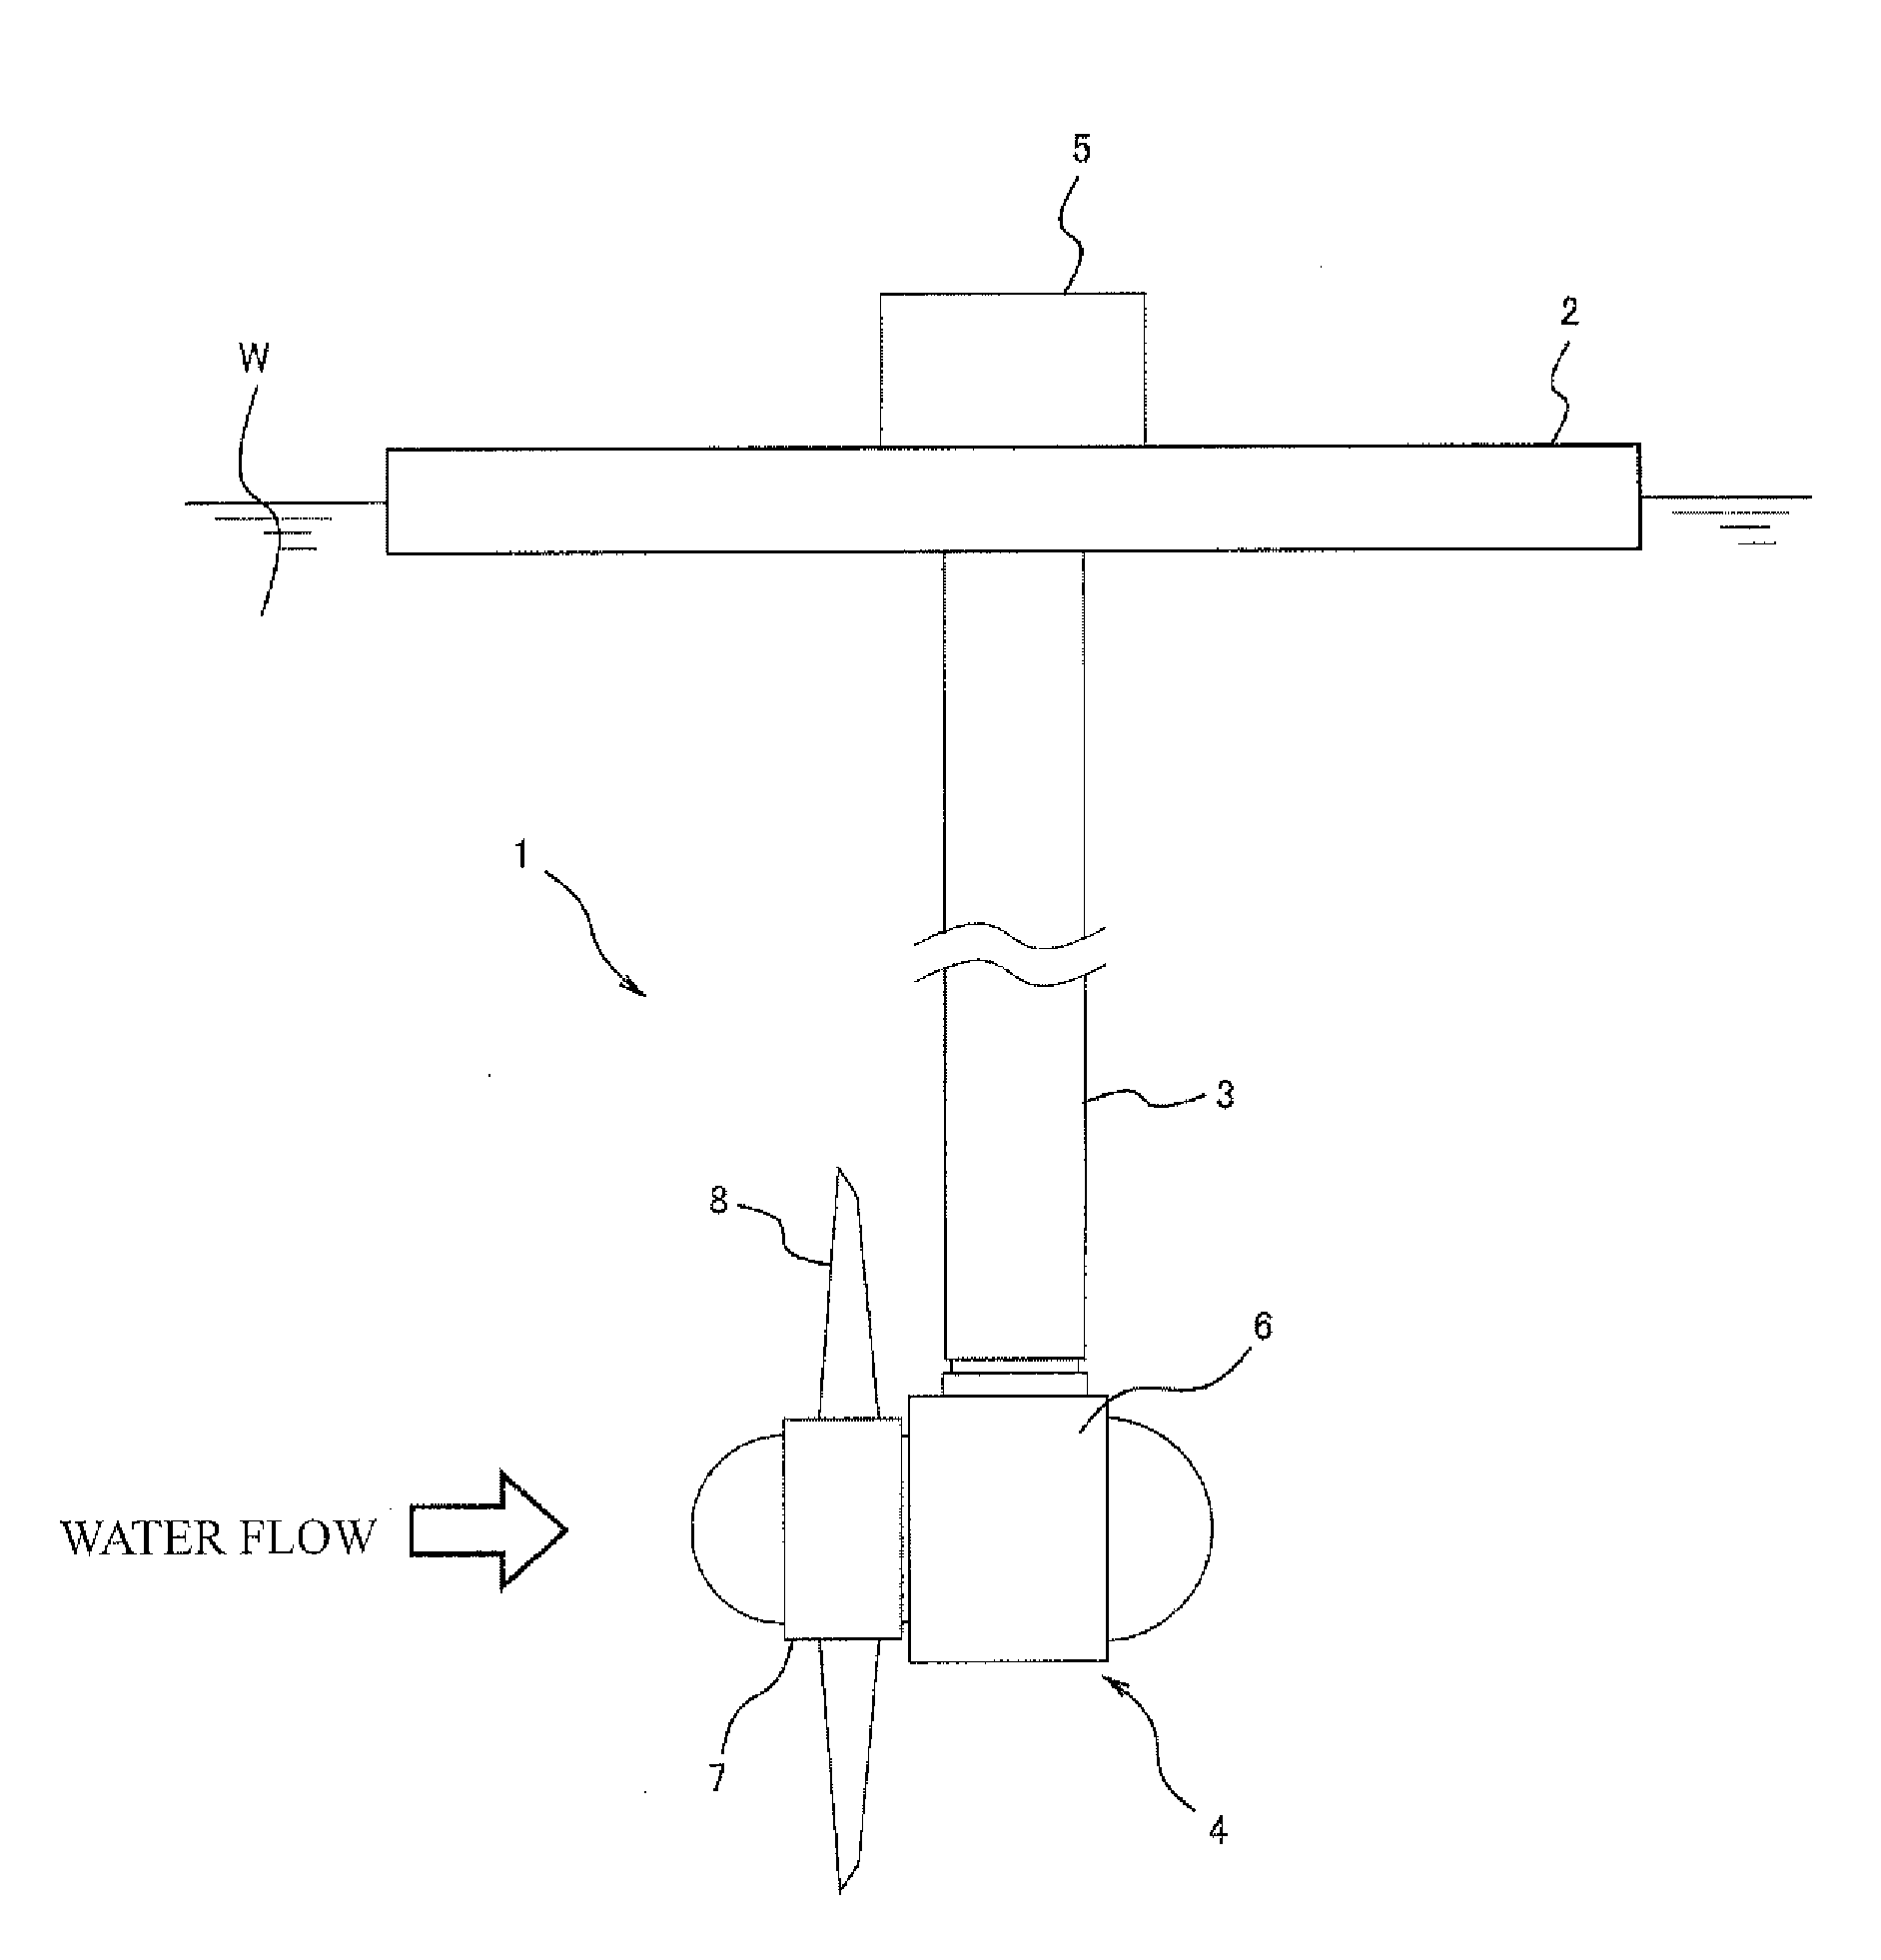 Water flow electricity generating device